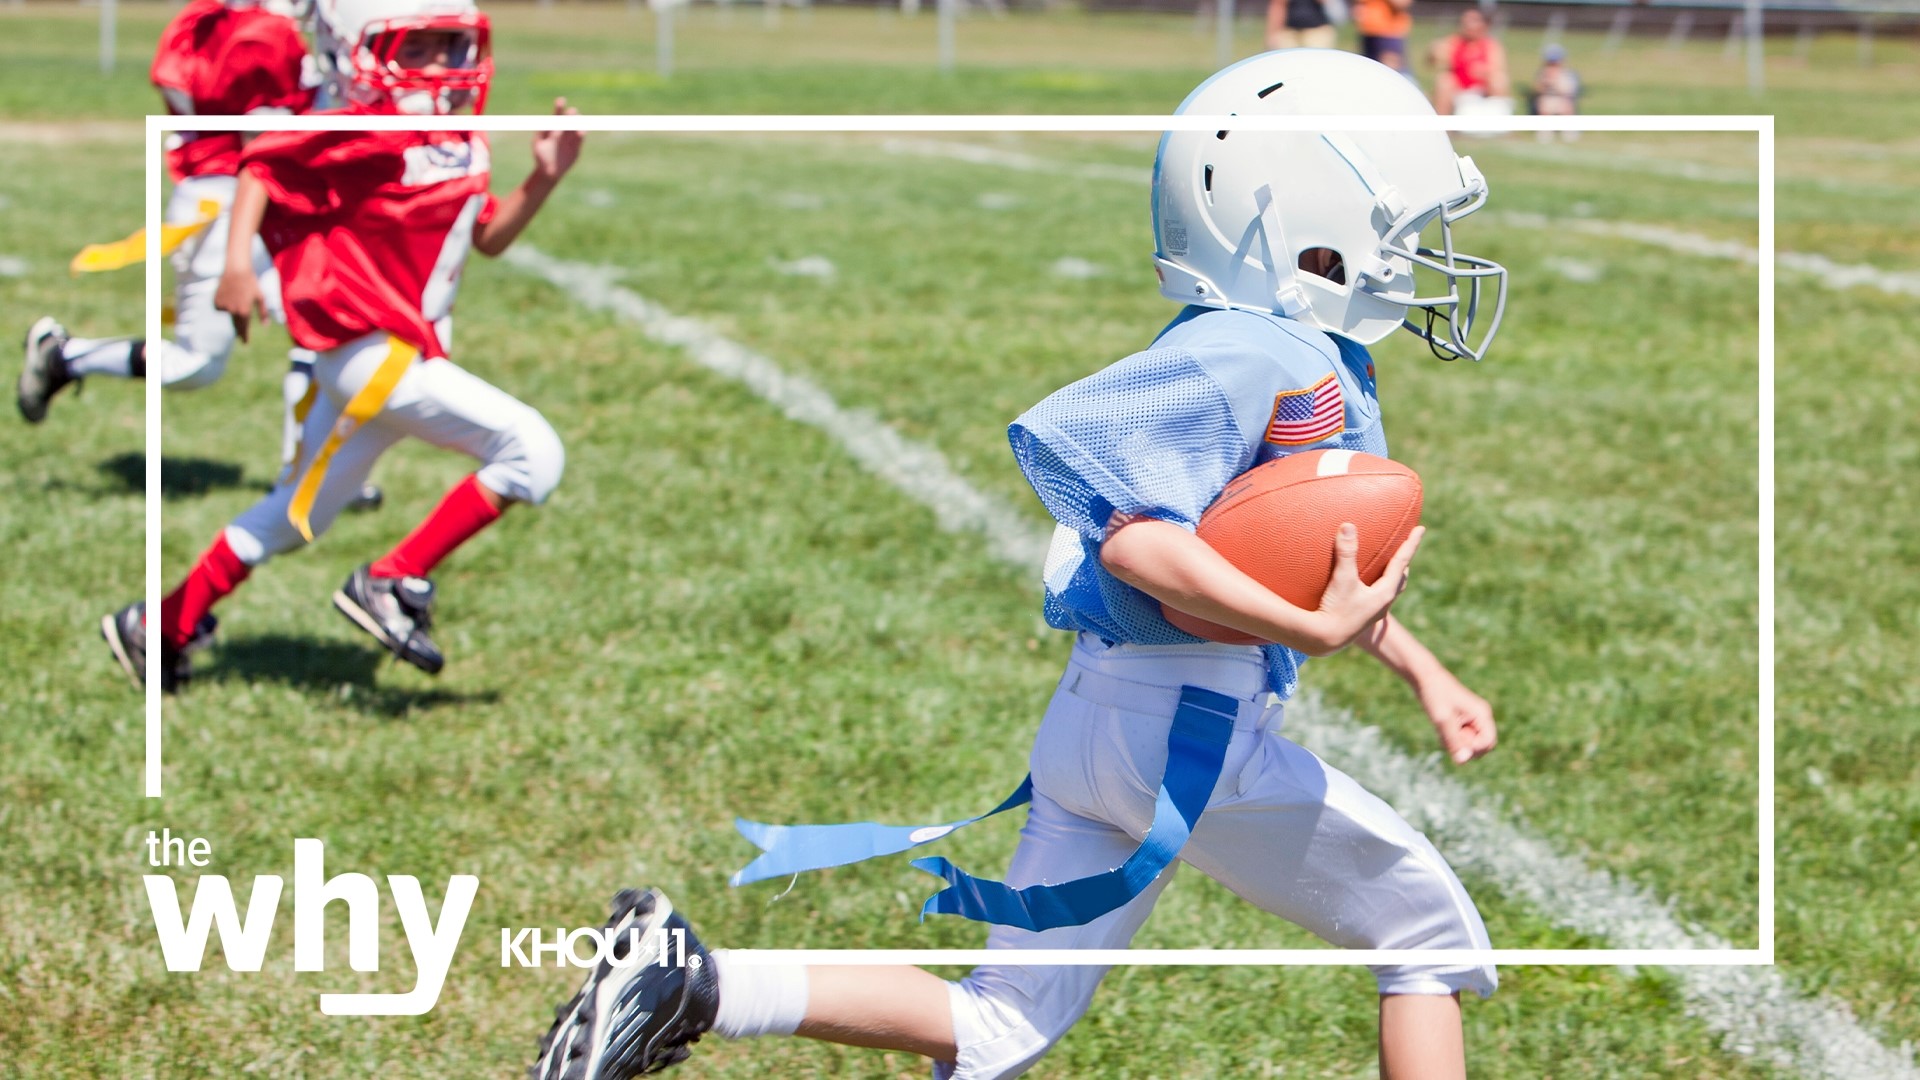 Kid’s sports teams can be costly but there are ways to save money.